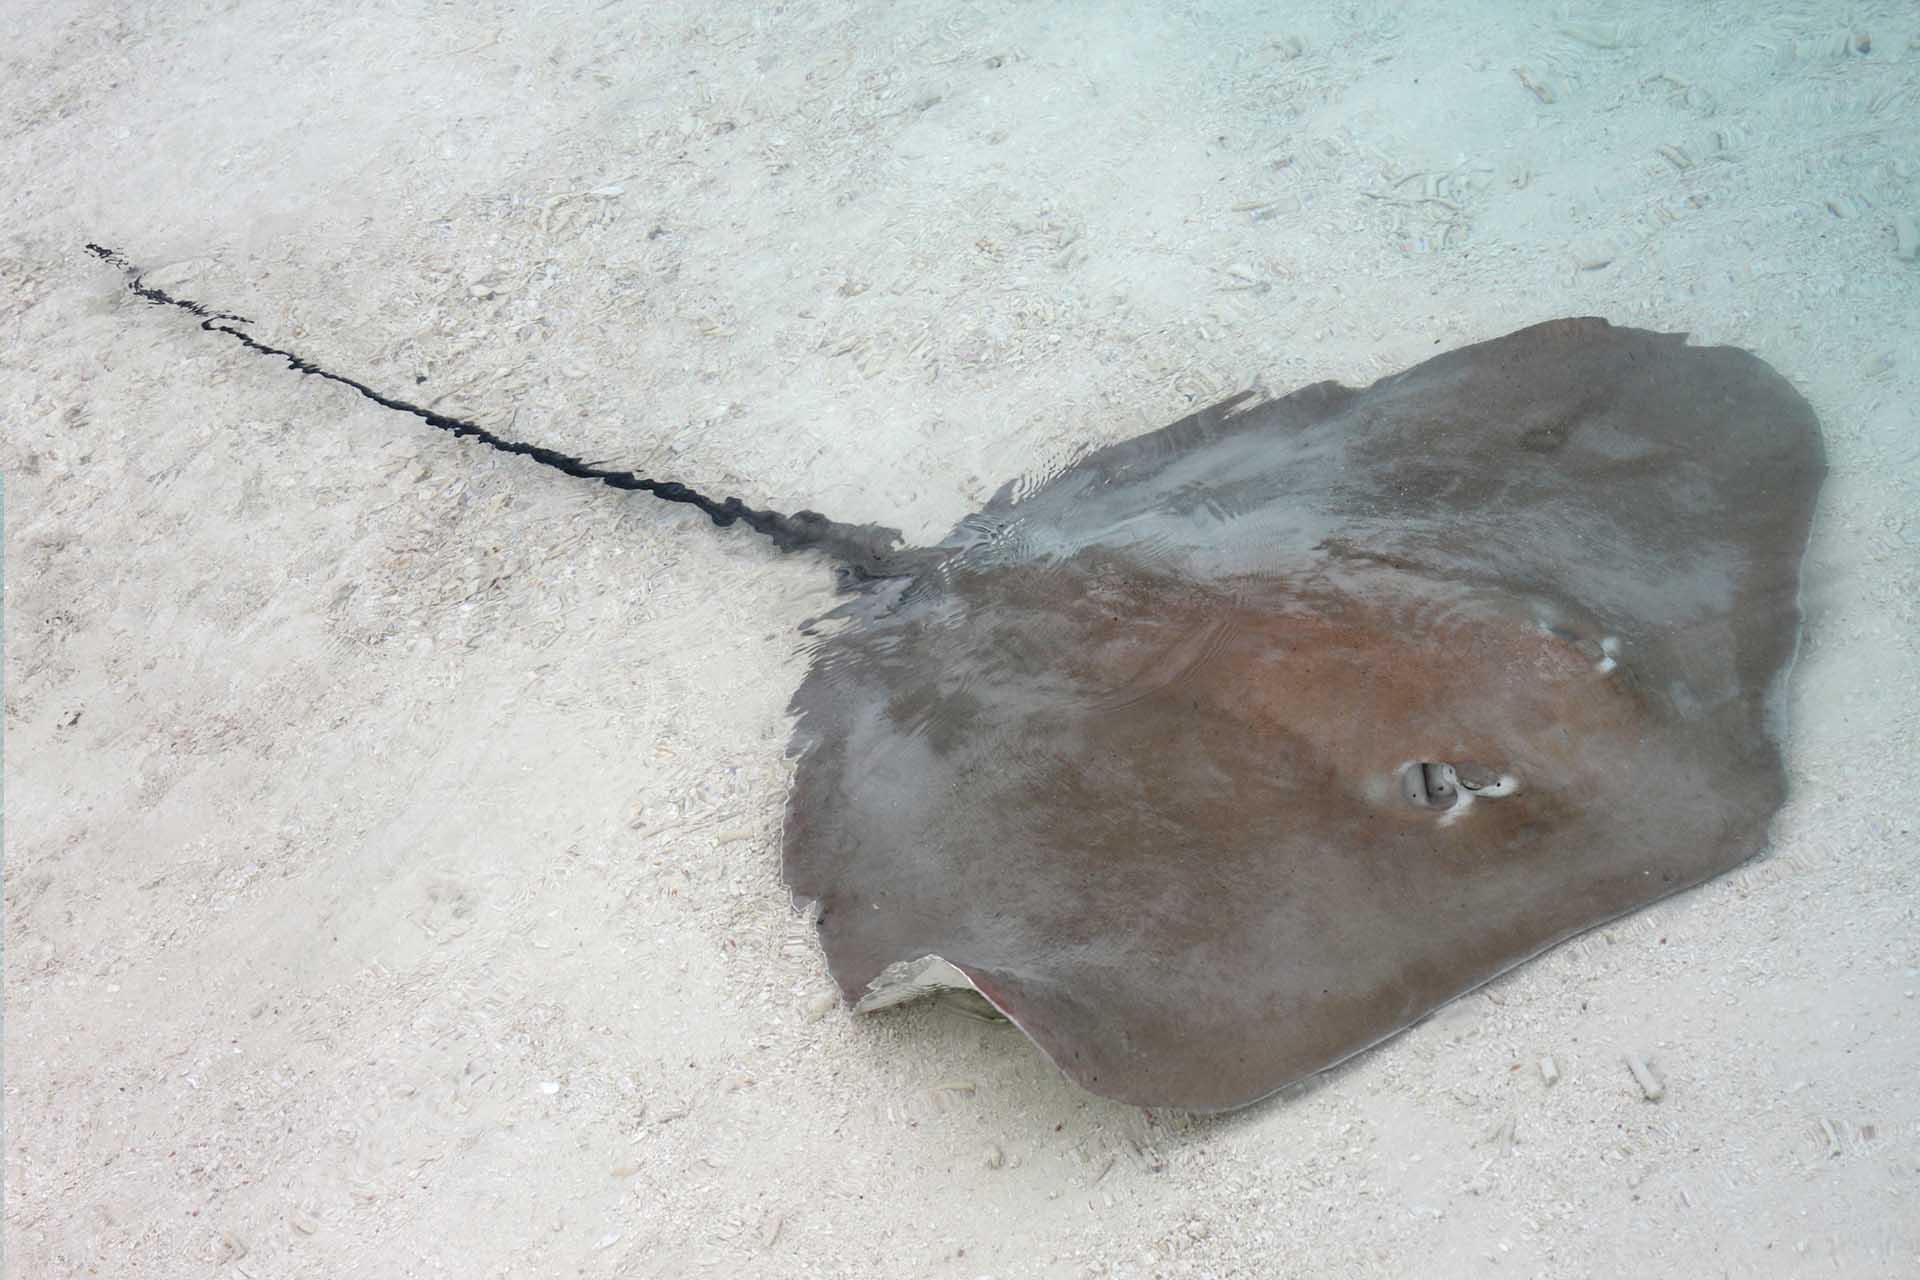 A stingray in the shallow water 